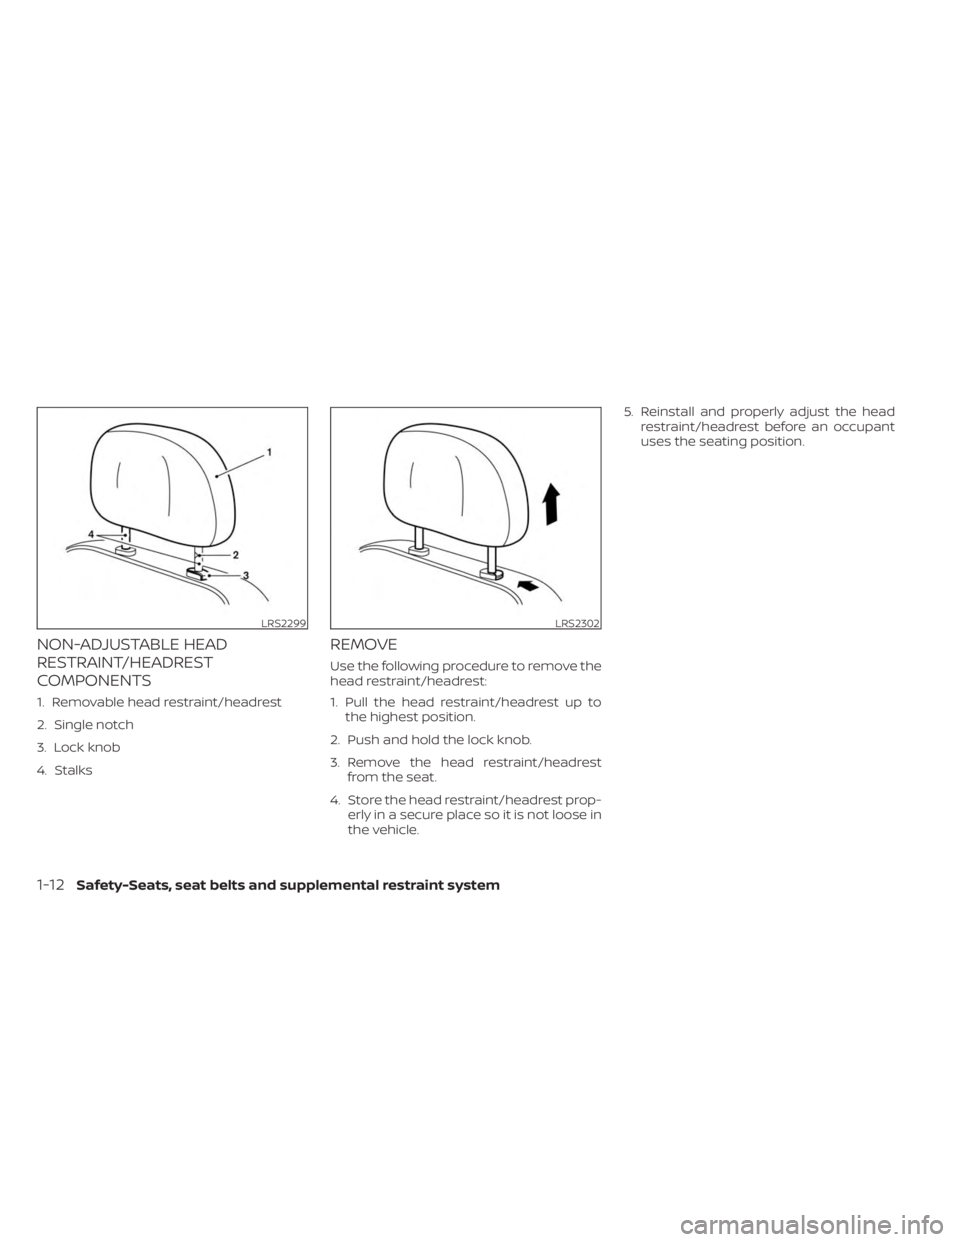 NISSAN FRONTIER 2022  Owner´s Manual NON-ADJUSTABLE HEAD
RESTRAINT/HEADREST
COMPONENTS
1. Removable head restraint/headrest
2. Single notch
3. Lock knob
4. Stalks
REMOVE
Use the following procedure to remove the
head restraint/headrest:
